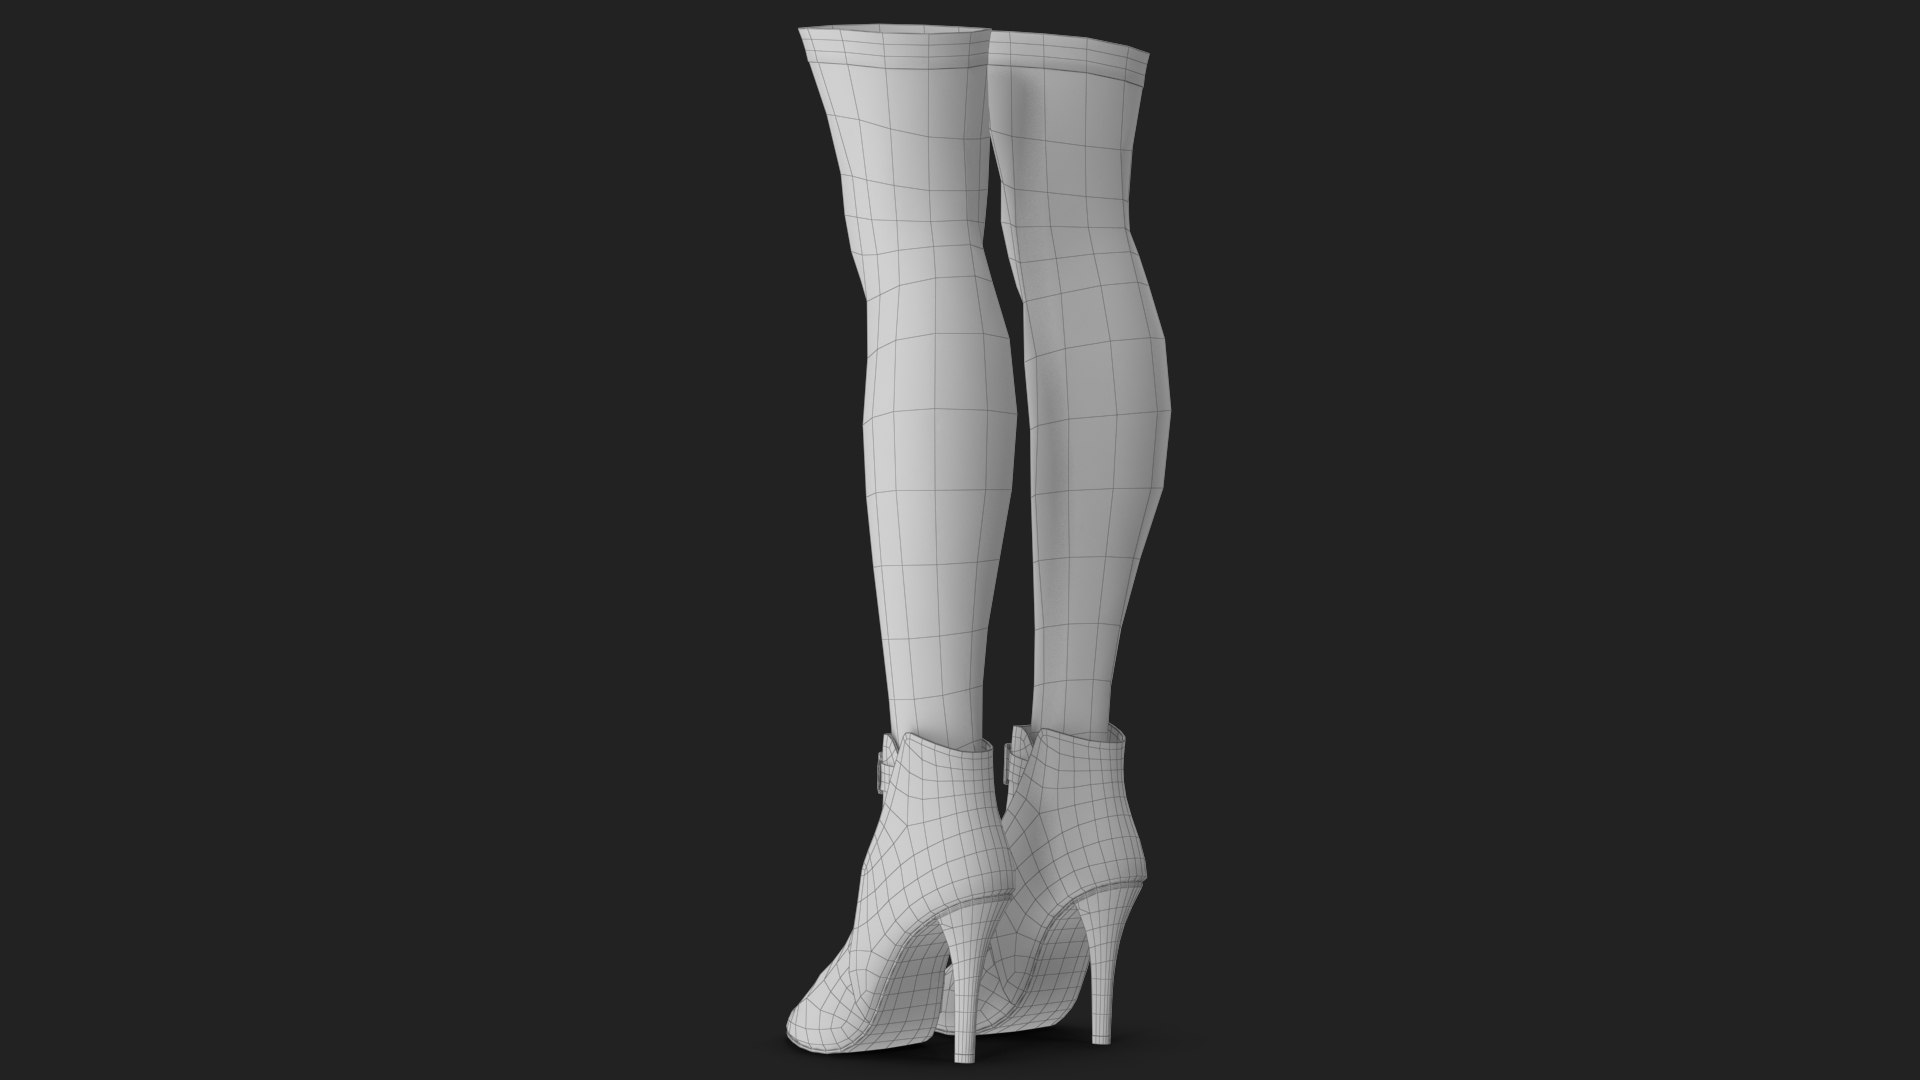 Leather Boots with Stockings 3 3D - TurboSquid 1773323